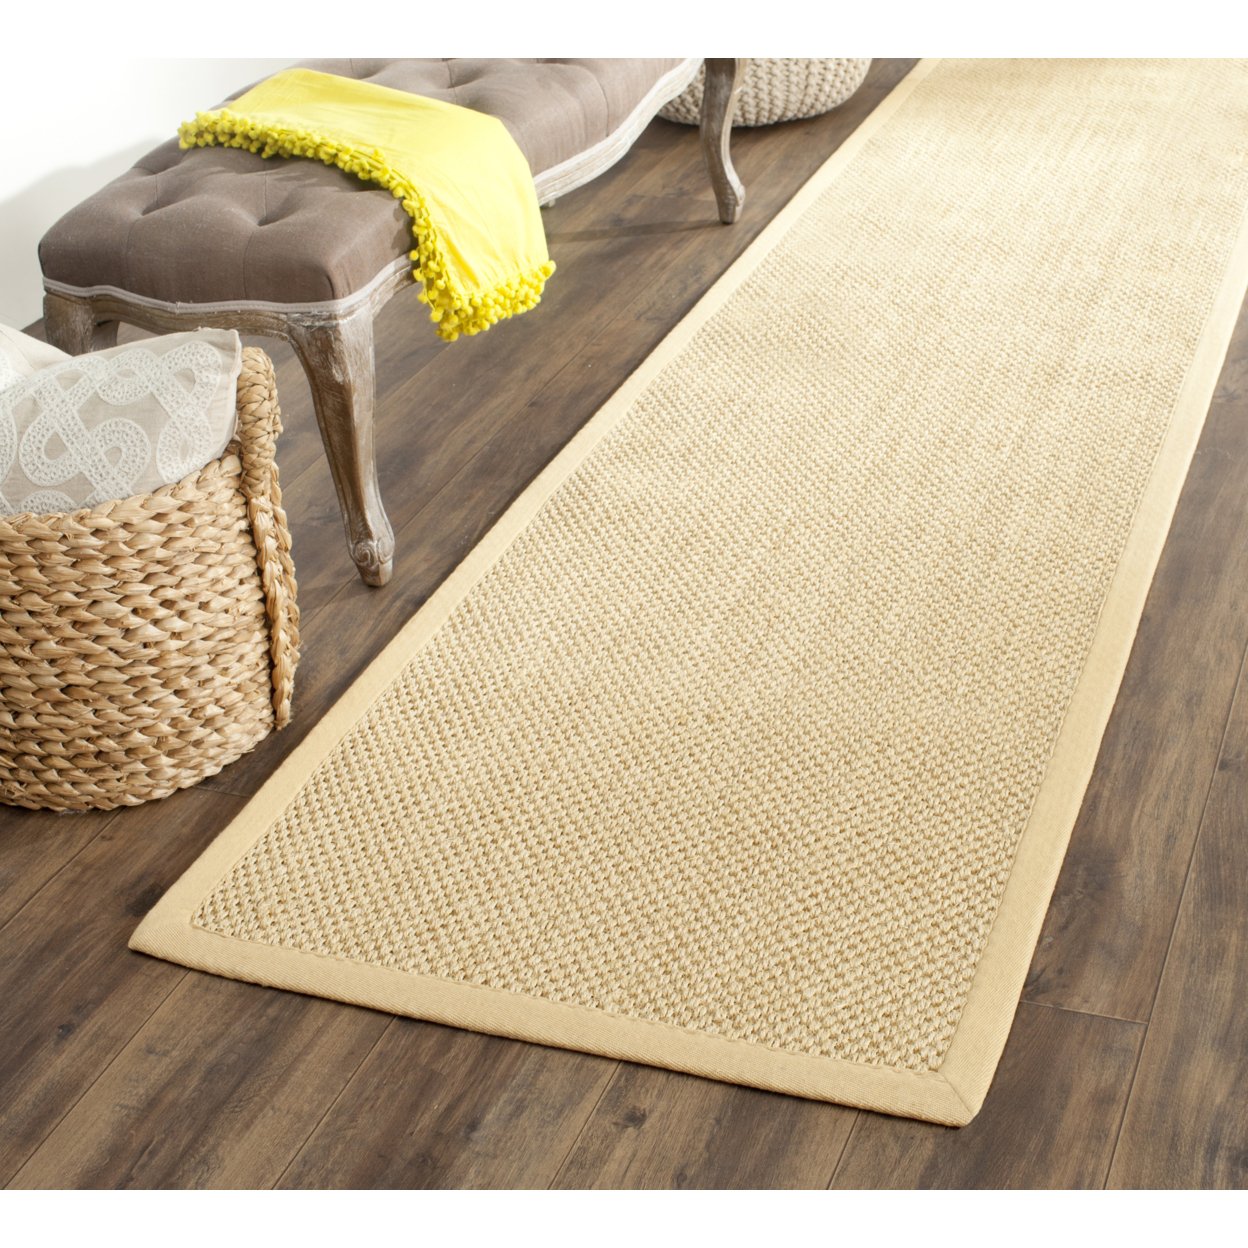 SAFAVIEH Natural Fiber Collection NF443A Maize/Wheat Rug - 2' 6 X 12'